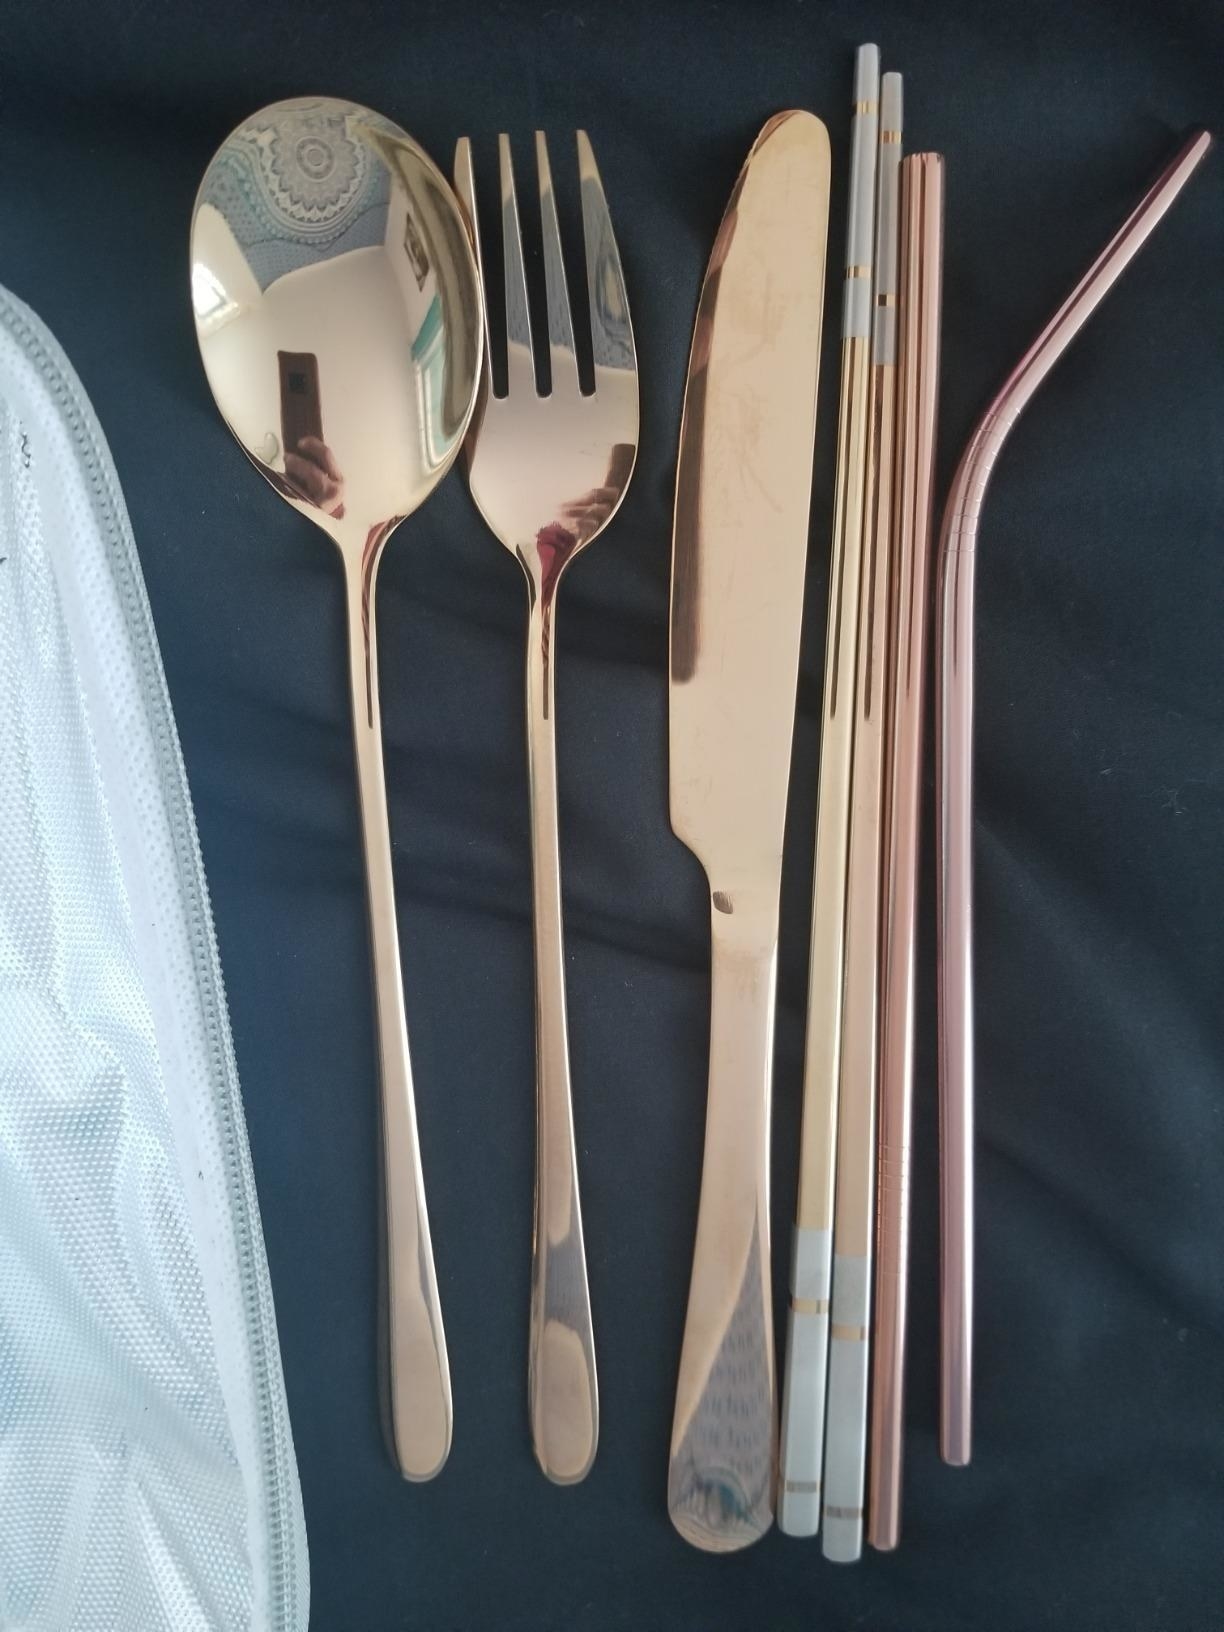 A set including a rose gold spoon, fork, knife, and straws